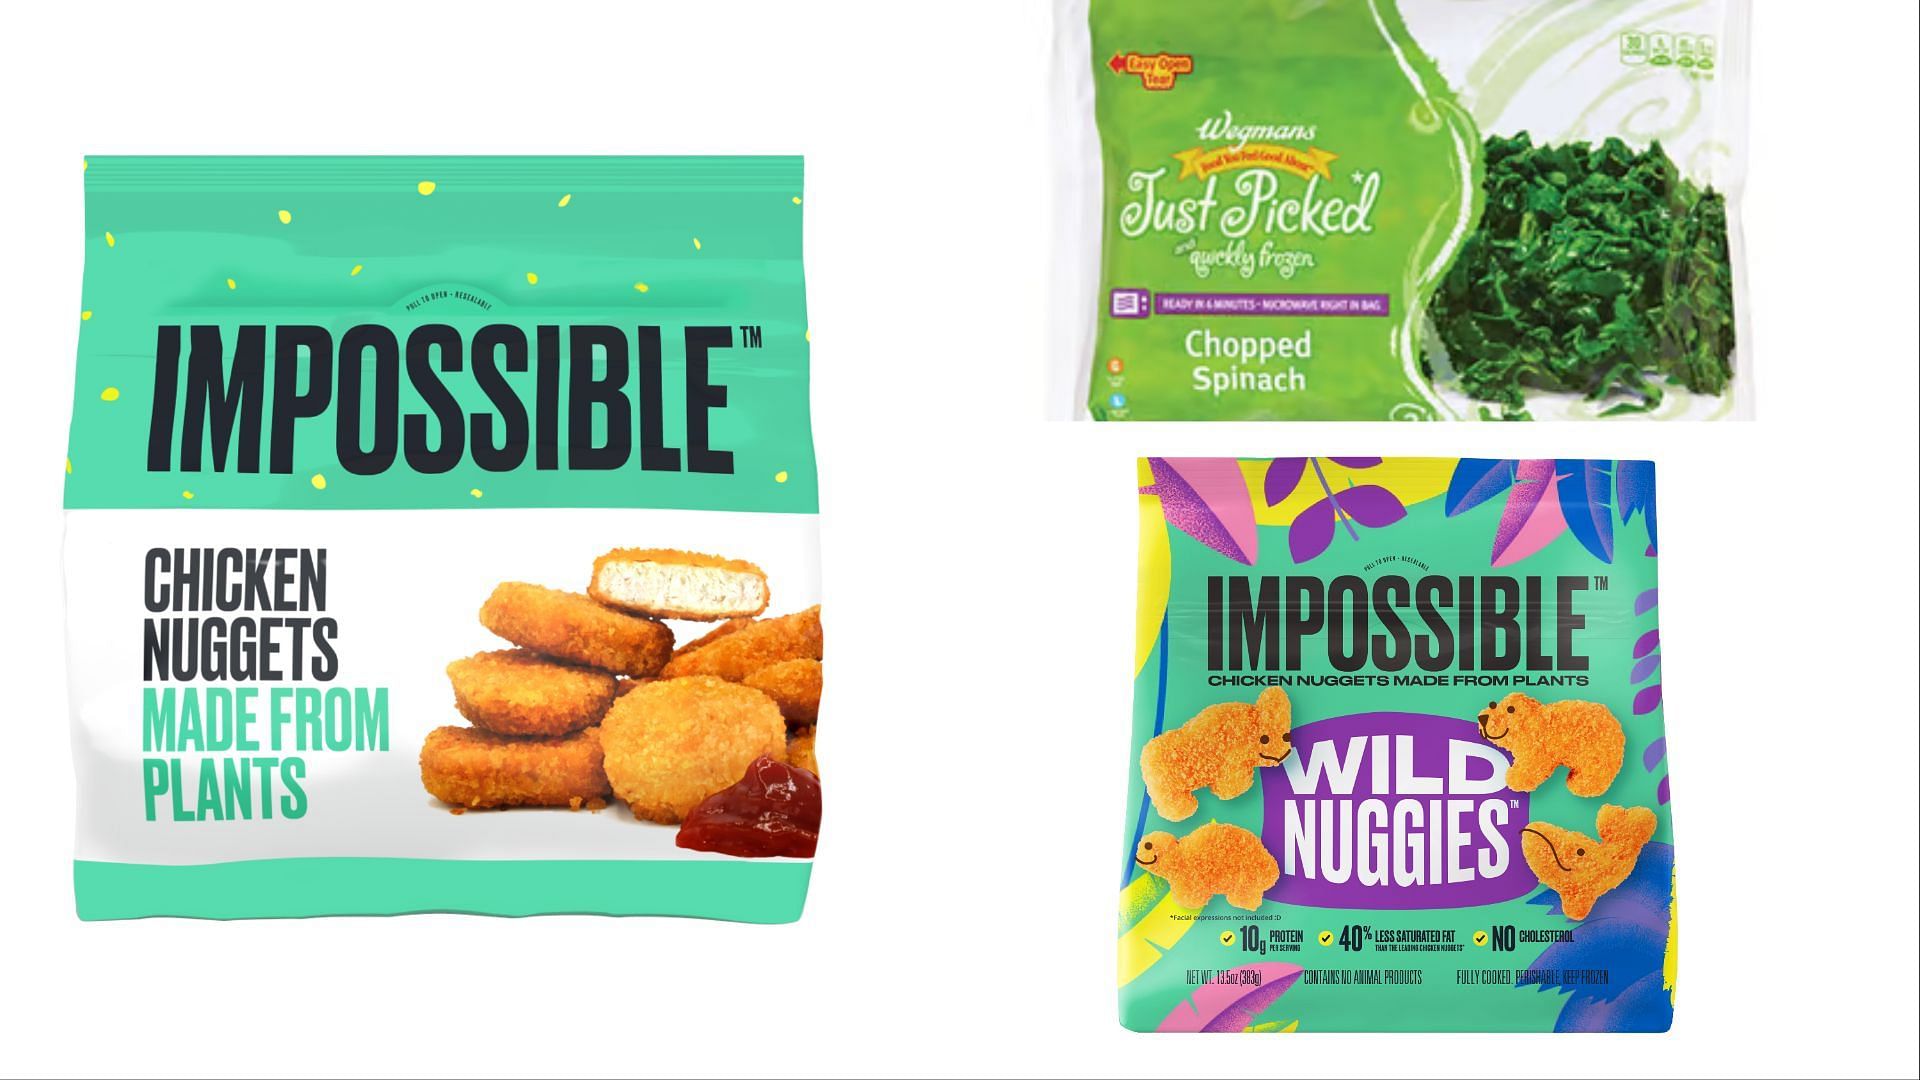 the recalled Frozen Chopped Spinach, Impossible Chicken Nuggets &amp; Wild Nuggies pose serious to severe health risks and are best not to be consumed (Image via Wegmans Food Market)